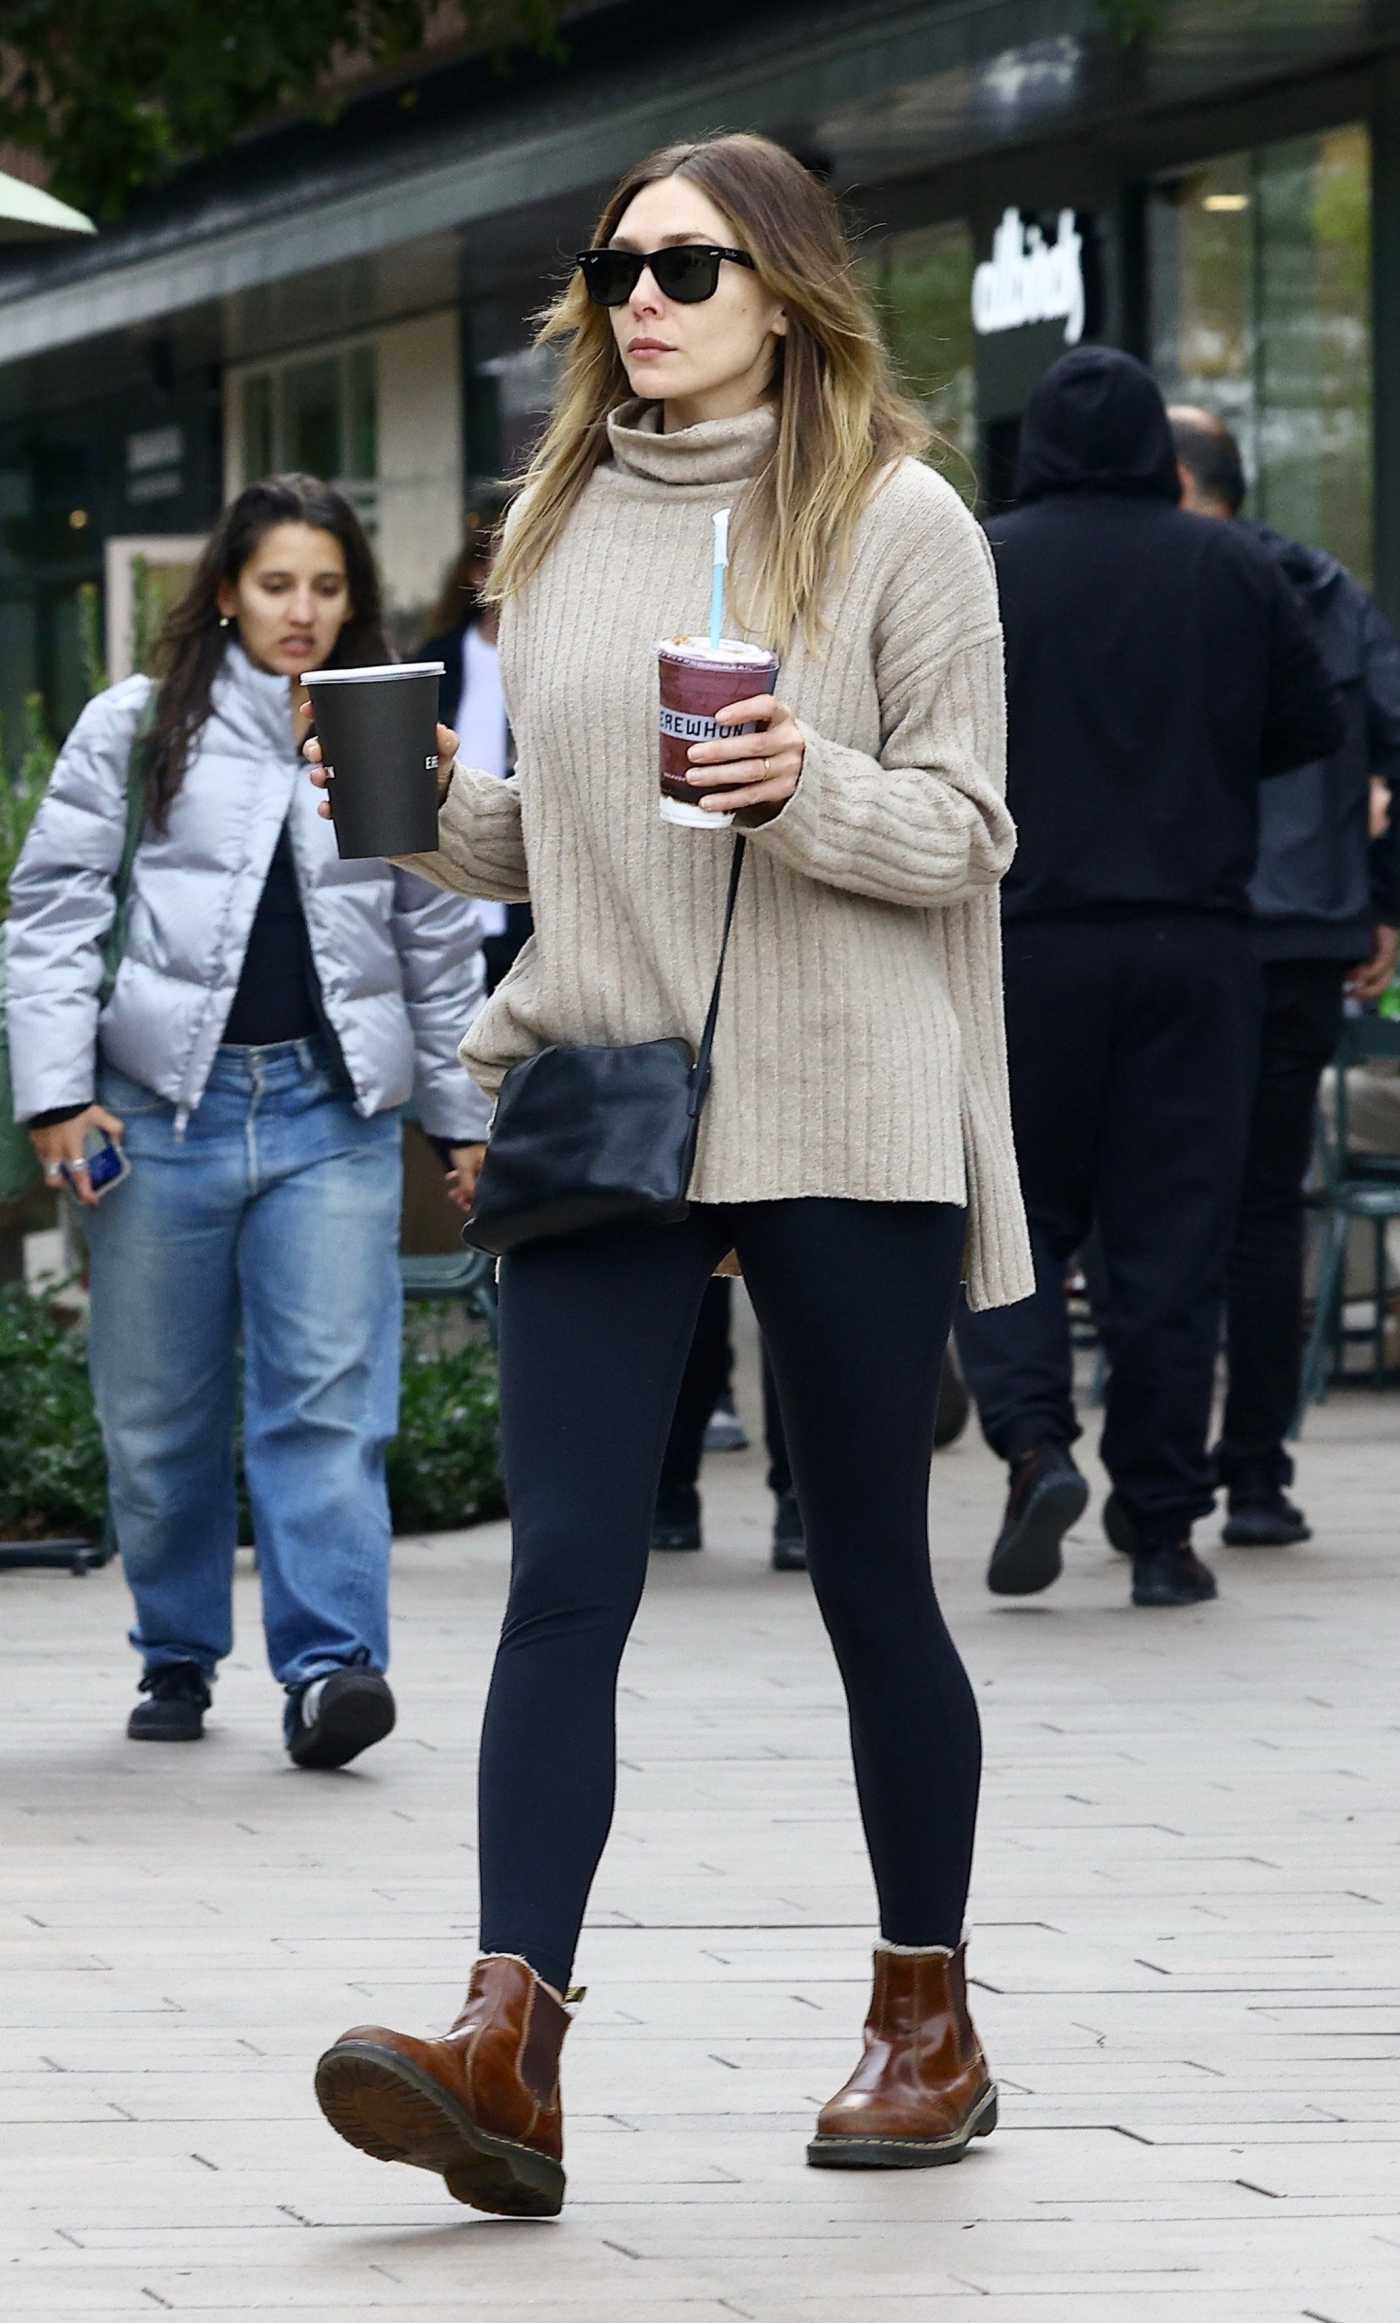 Elizabeth Olsen in a Beige Sweater Stops by Erewhon to Get a Smoothie in Studio City 11/29/2023